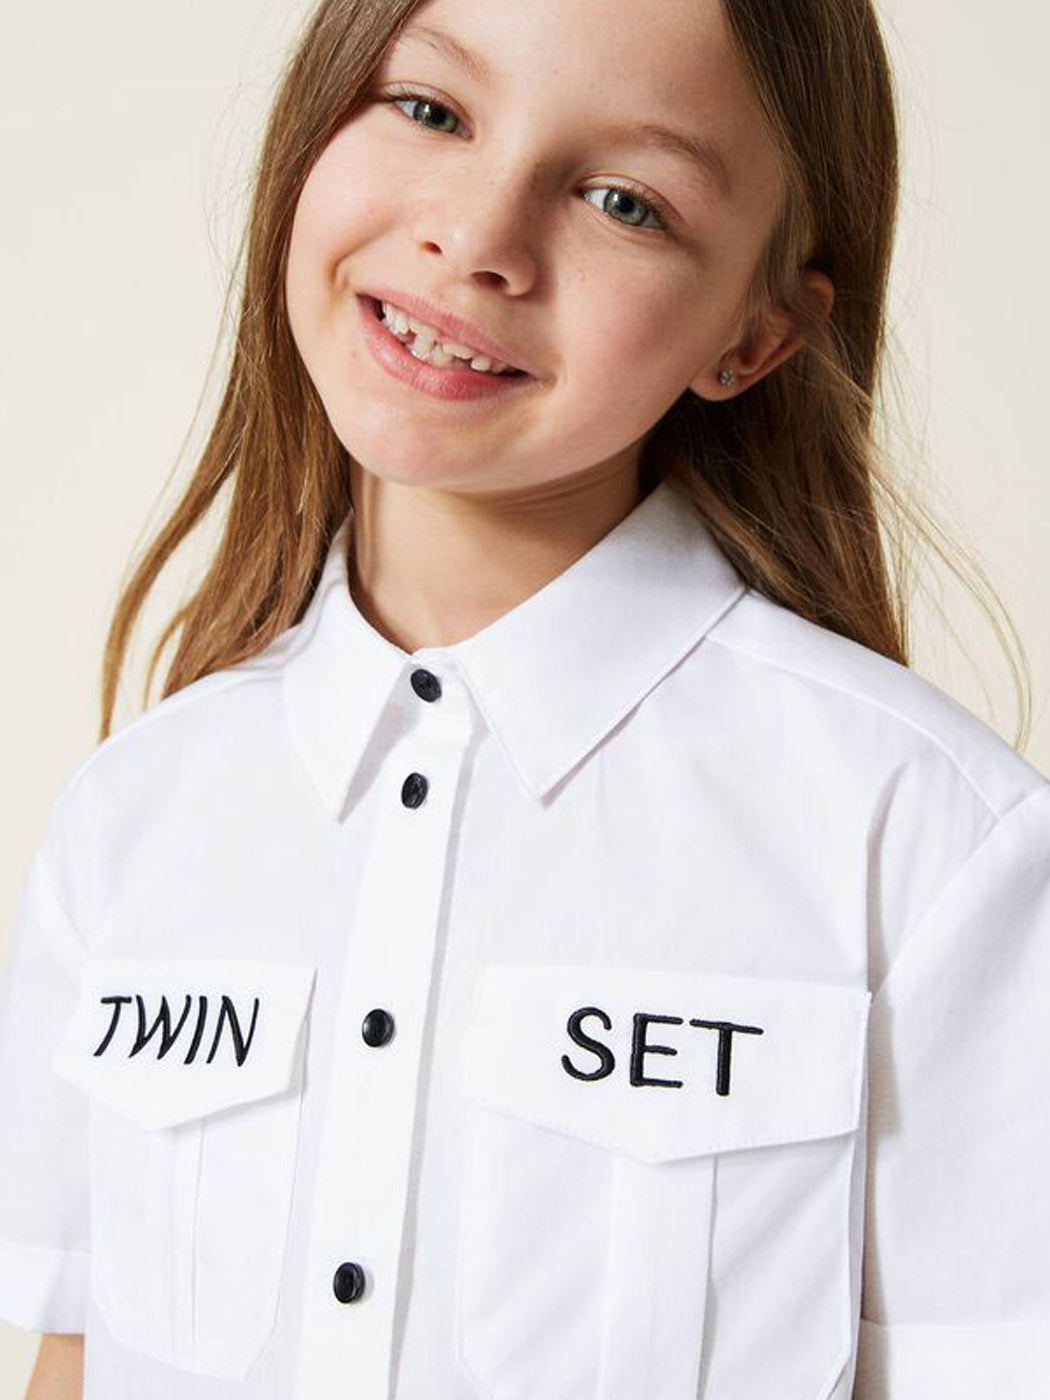 TWINSET Girl's Shirt with embroidered logo - 221GJ2021 white